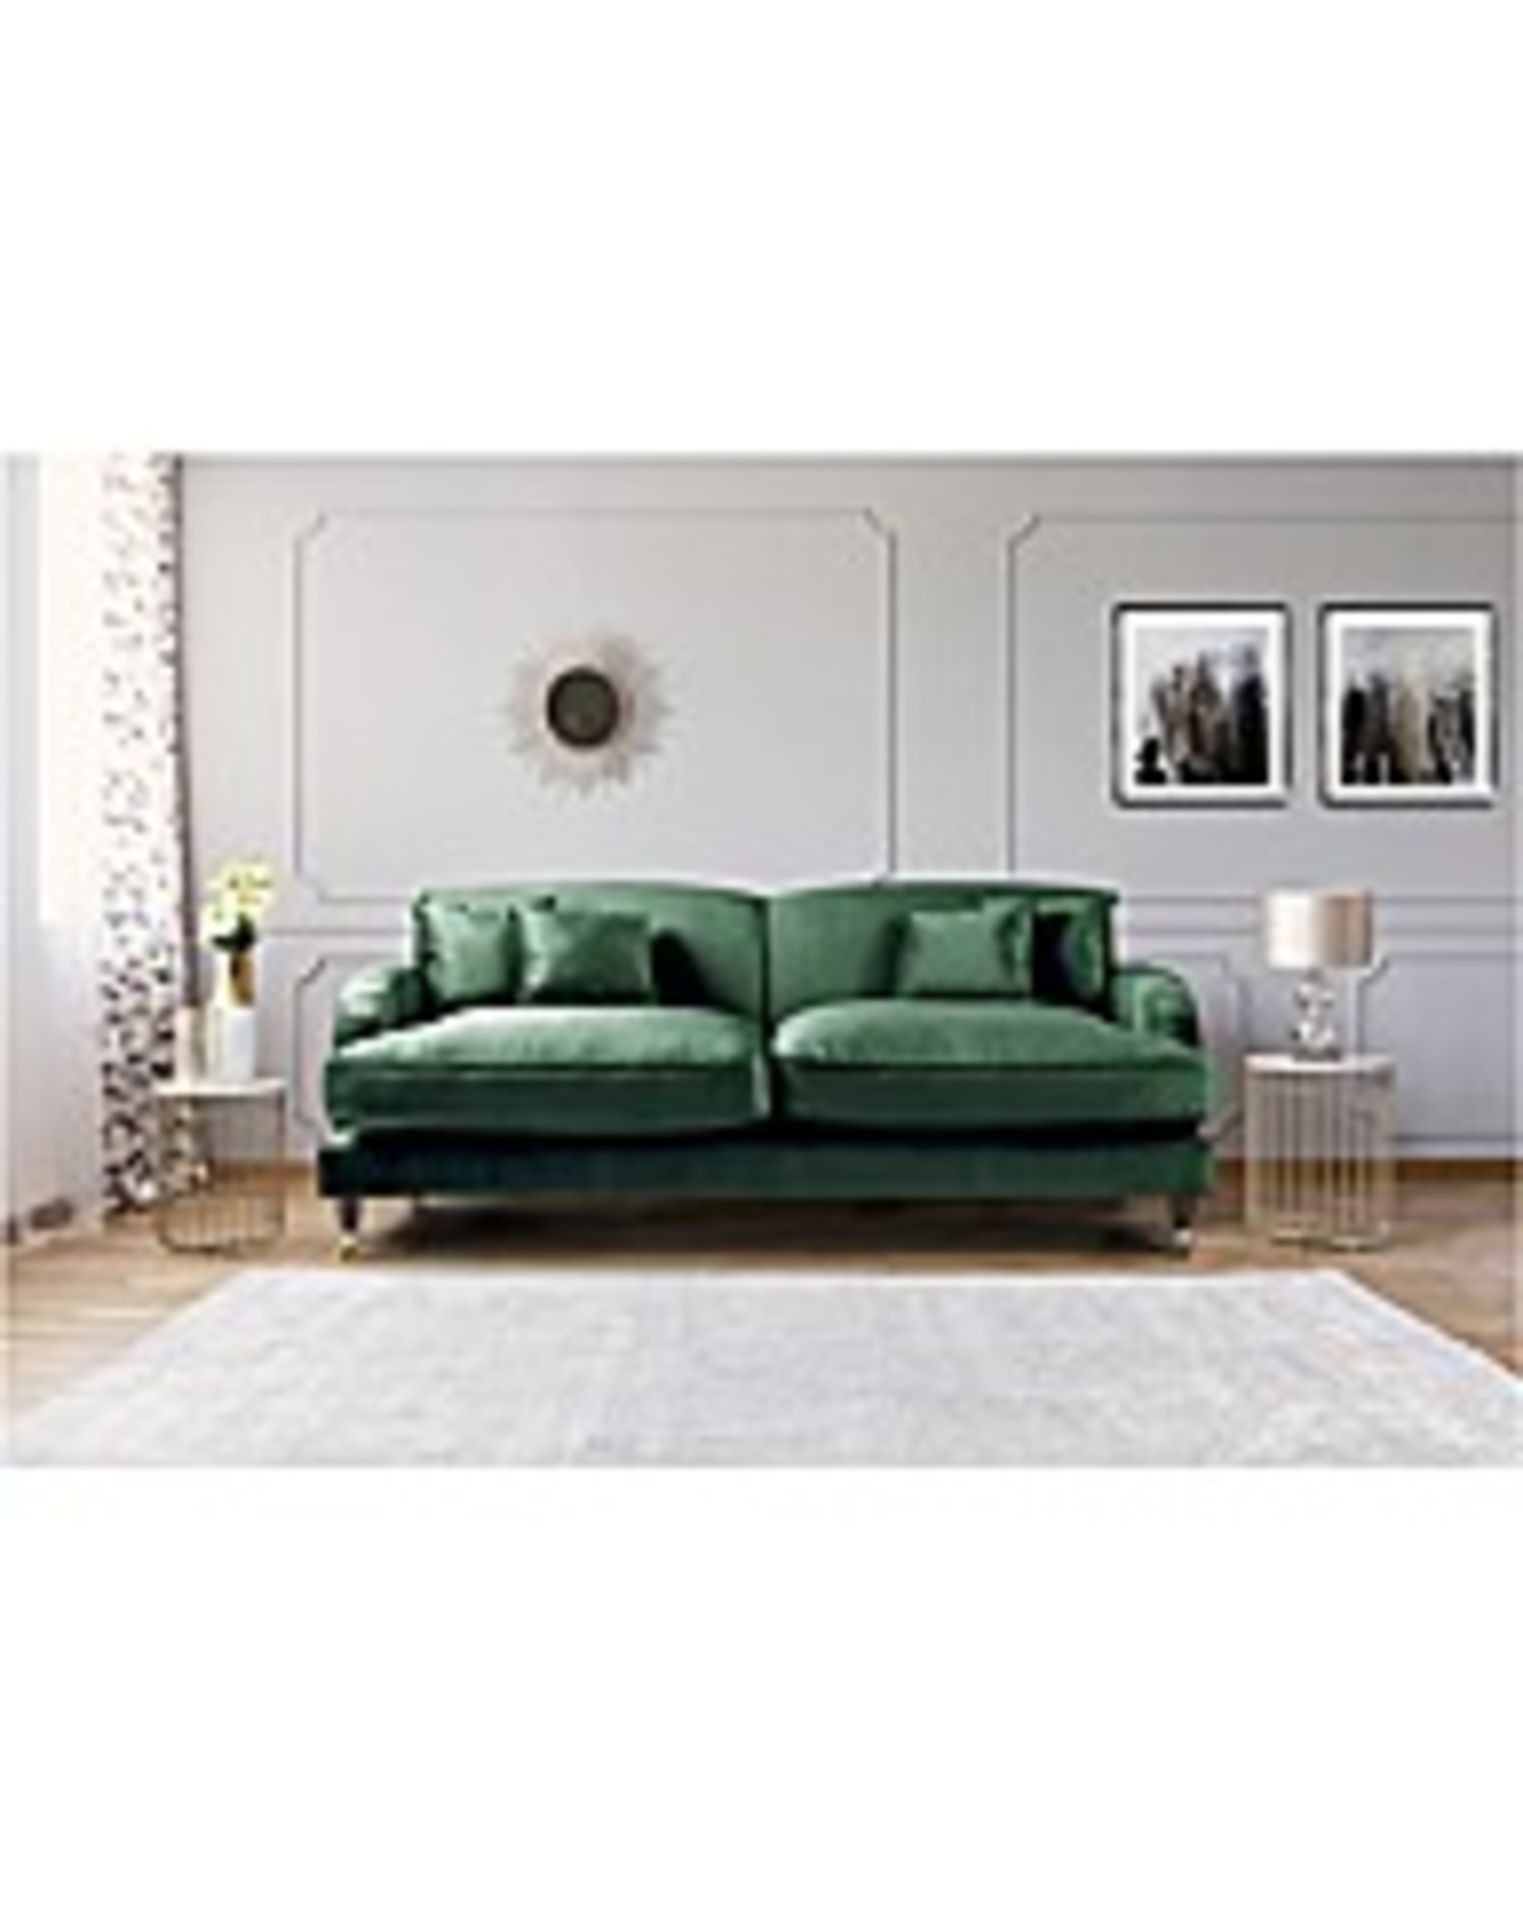 116785D - Double Pallet of Grade C Returns - Sofas Total RRP £1297 - Image 3 of 3